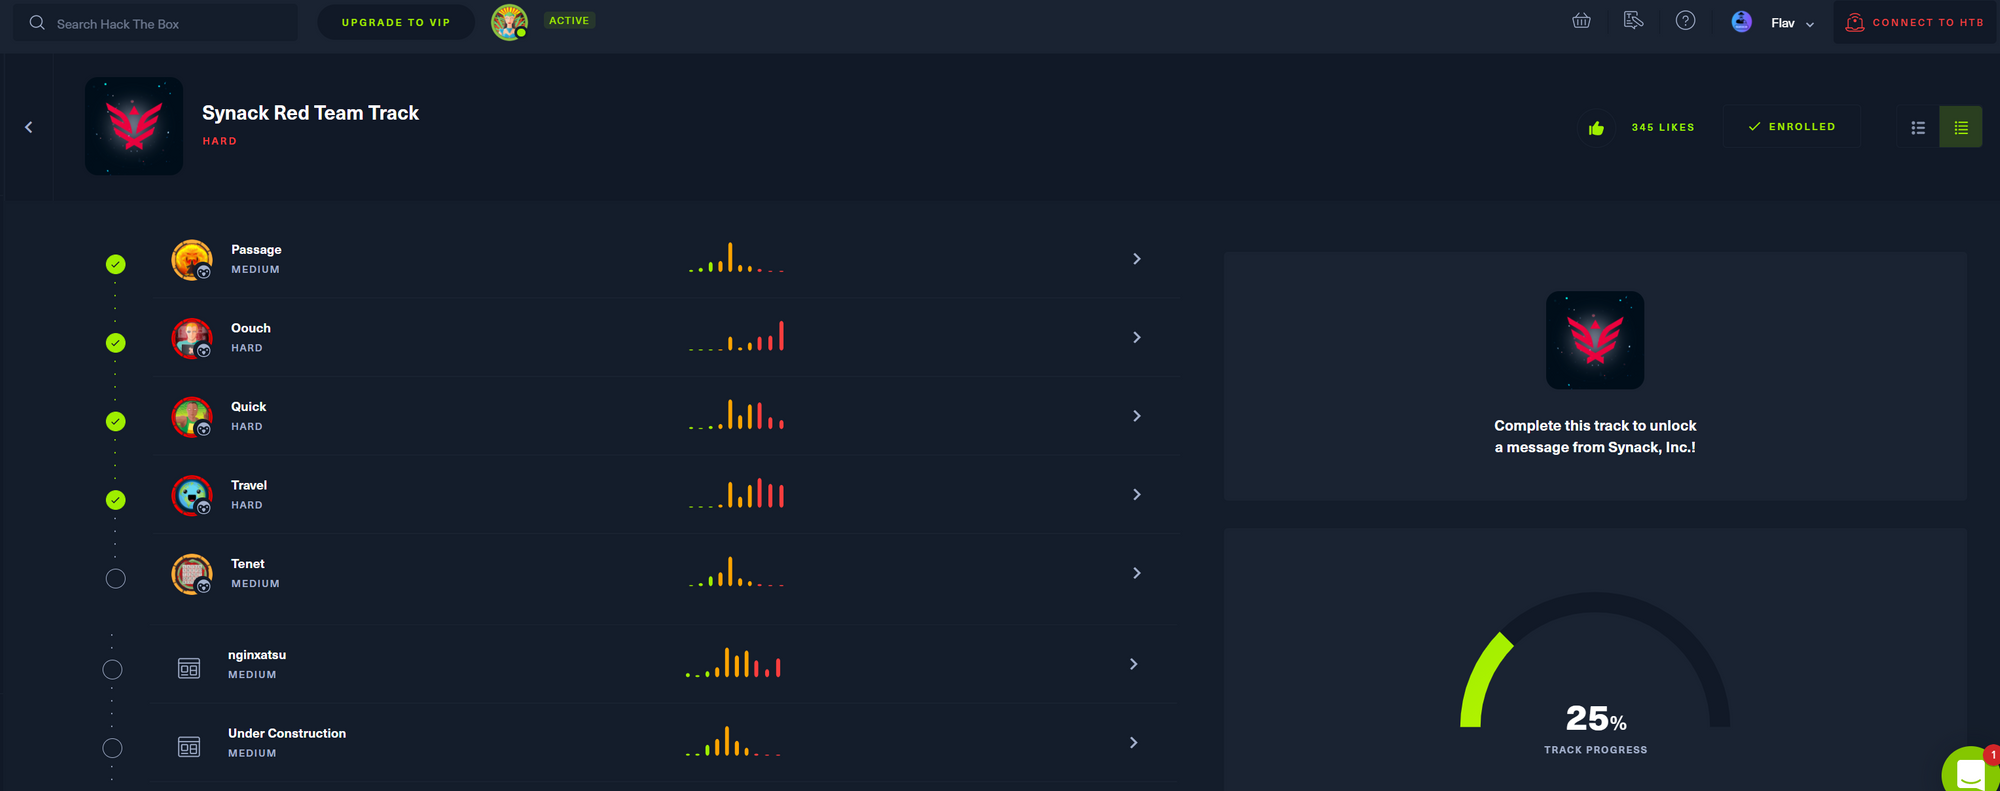 Synack Track on HackTheBox